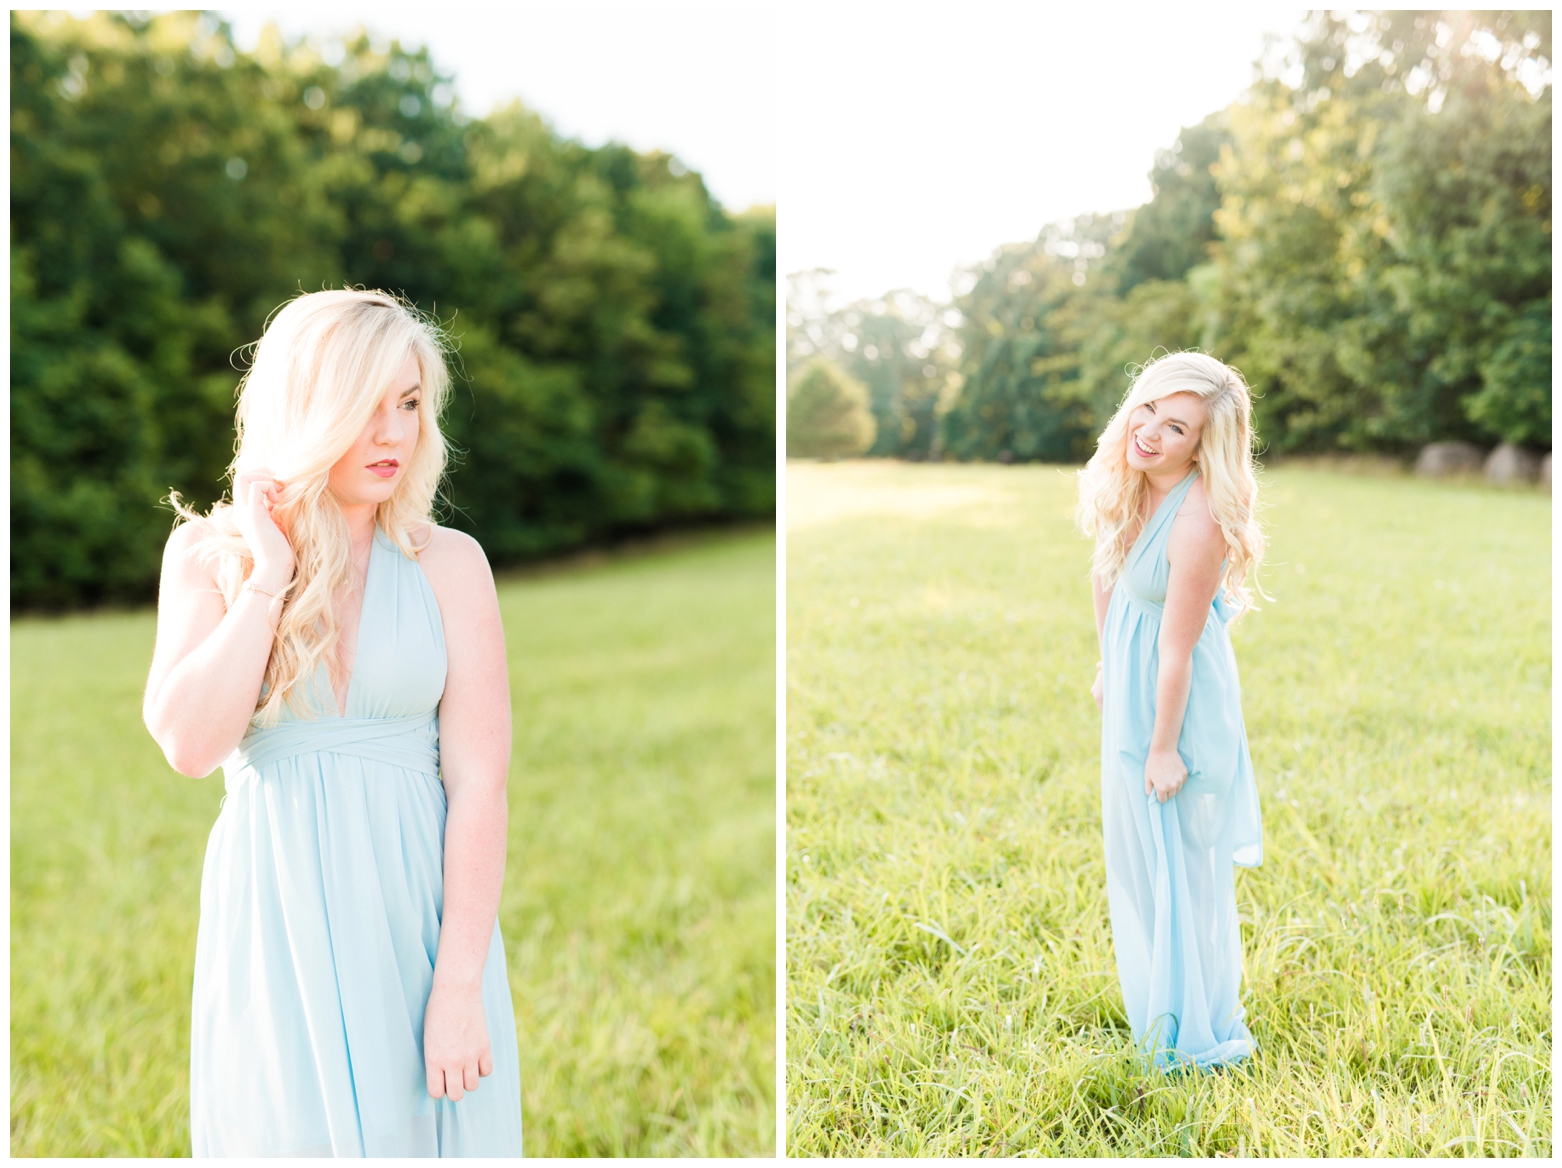 View More: http://jessicahustedphotography.pass.us/hopes-birthday